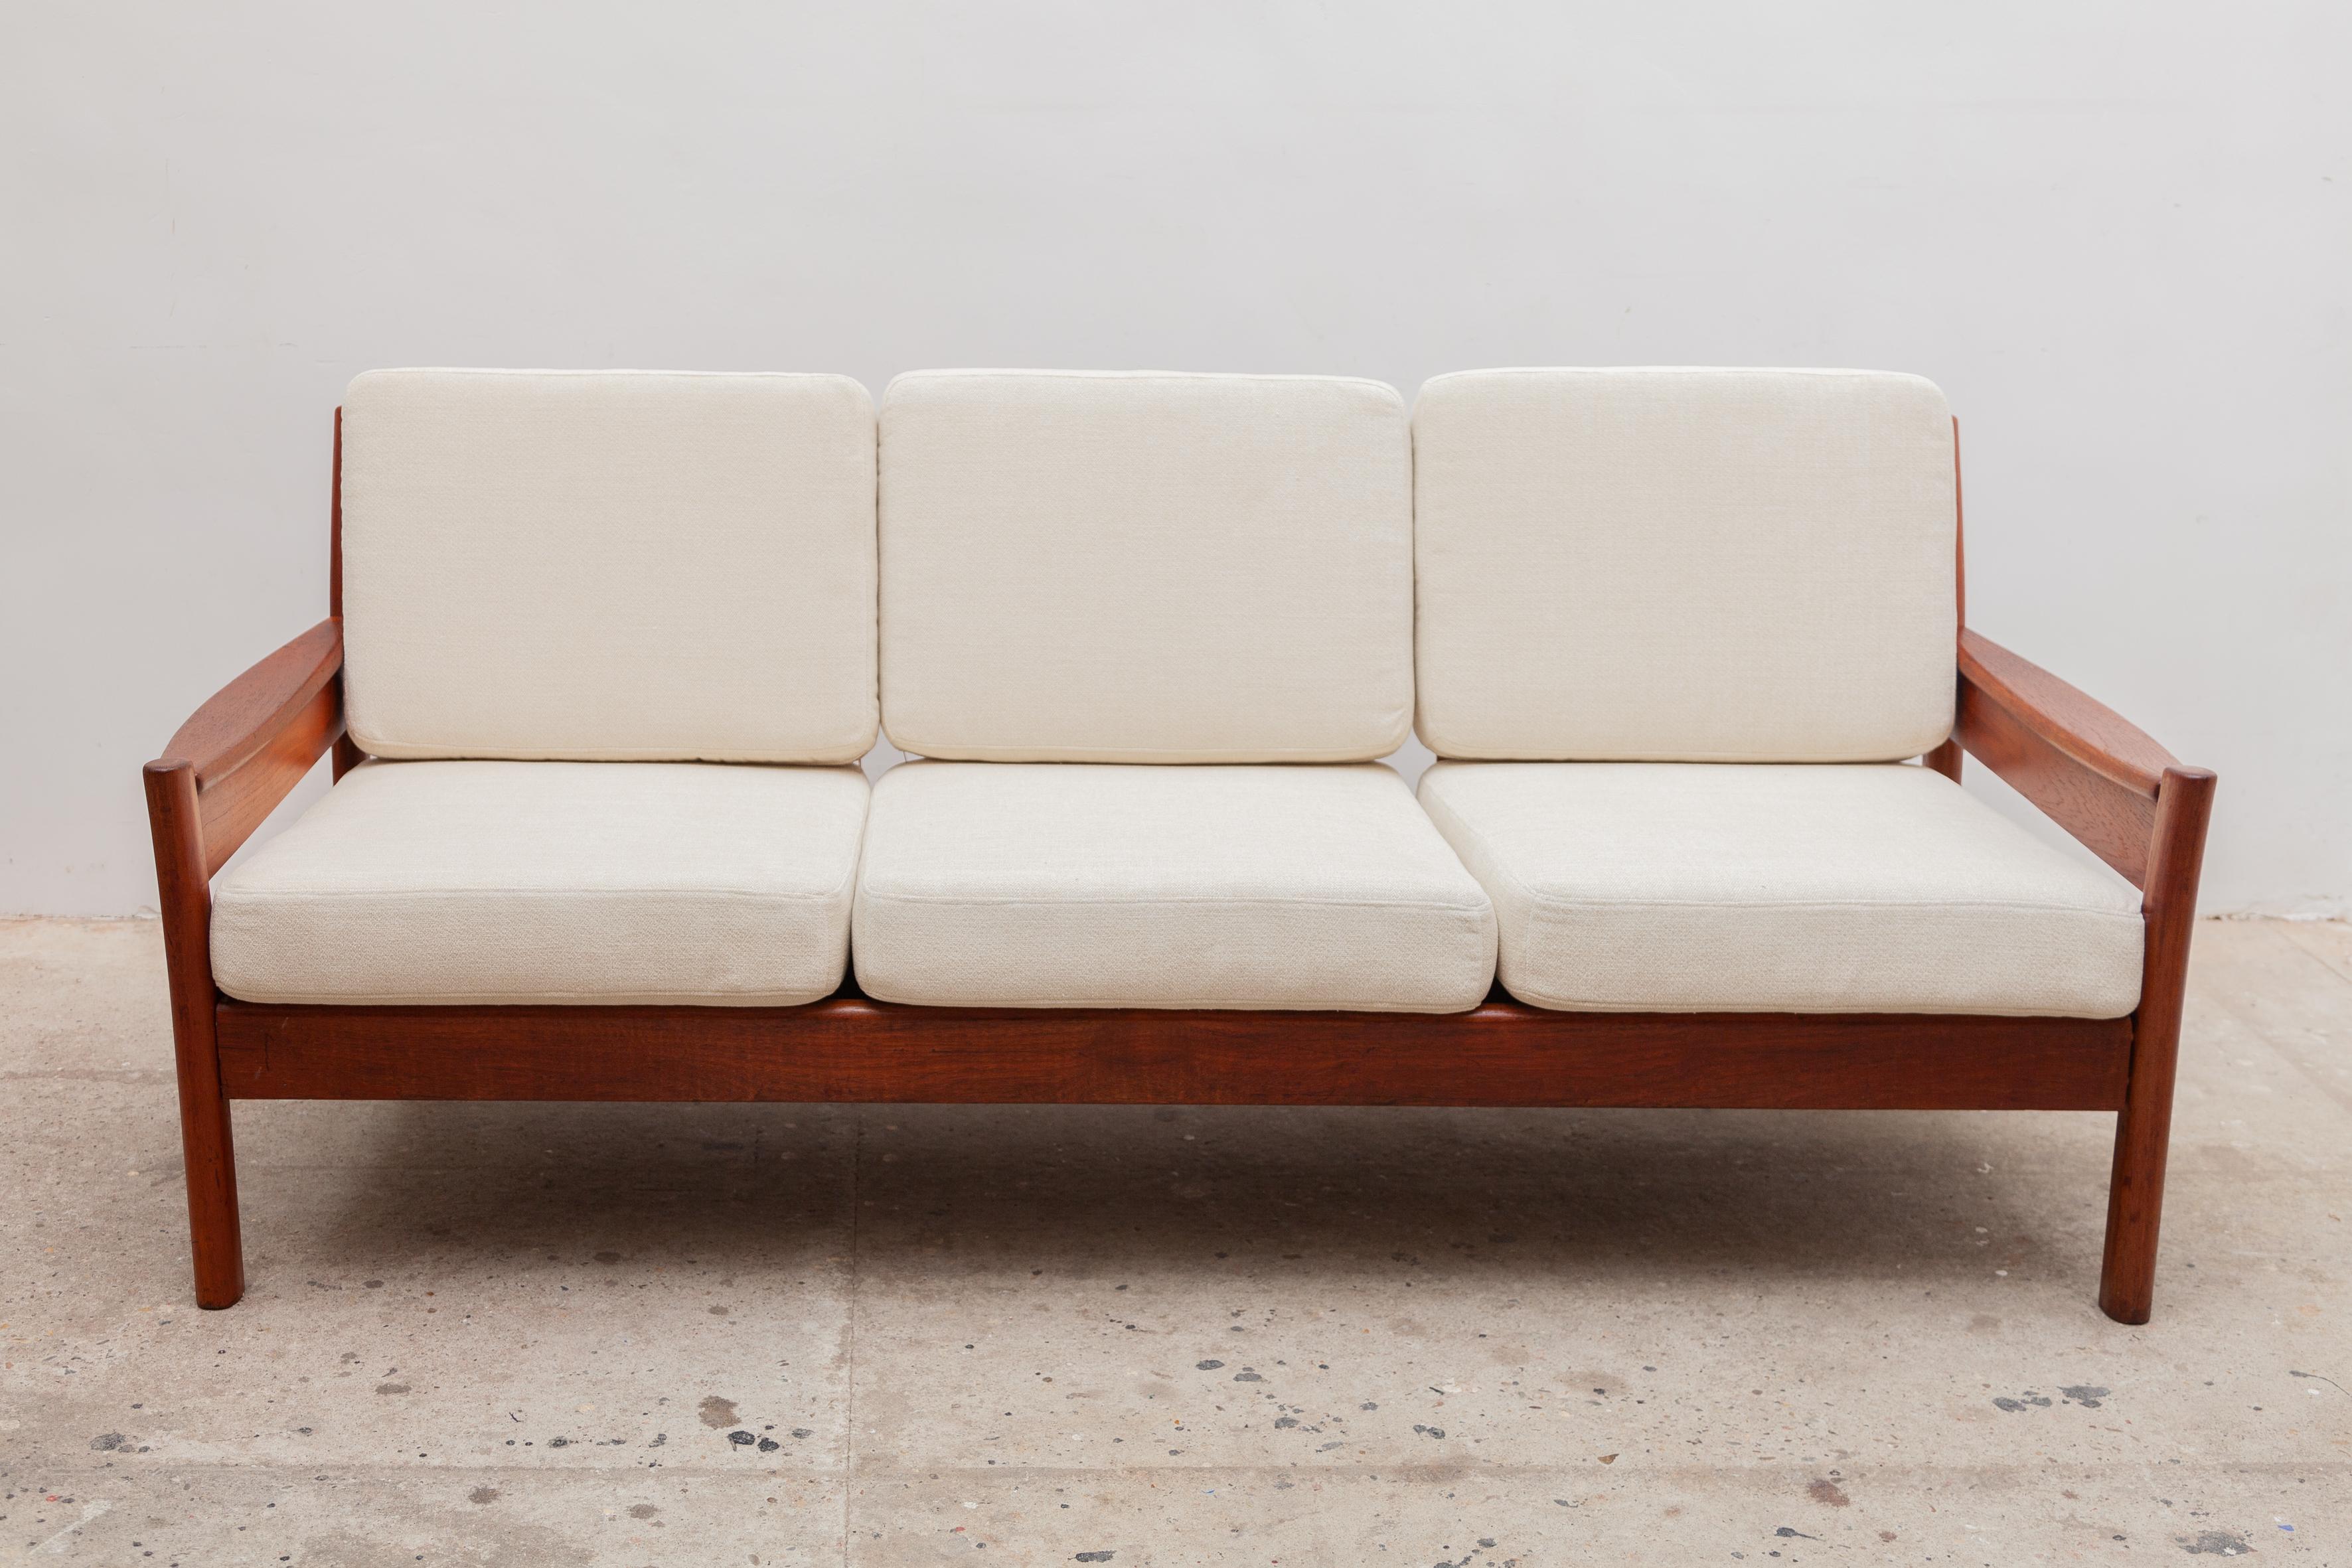 Vintage midcentury three-seat sofa by Dyrlund, Denmark. Elegant solid teak frame with new cream wool woven upholstery.
Dimensions: 190 W x 70 H x 75 D cm, seat 41 cm high.
 